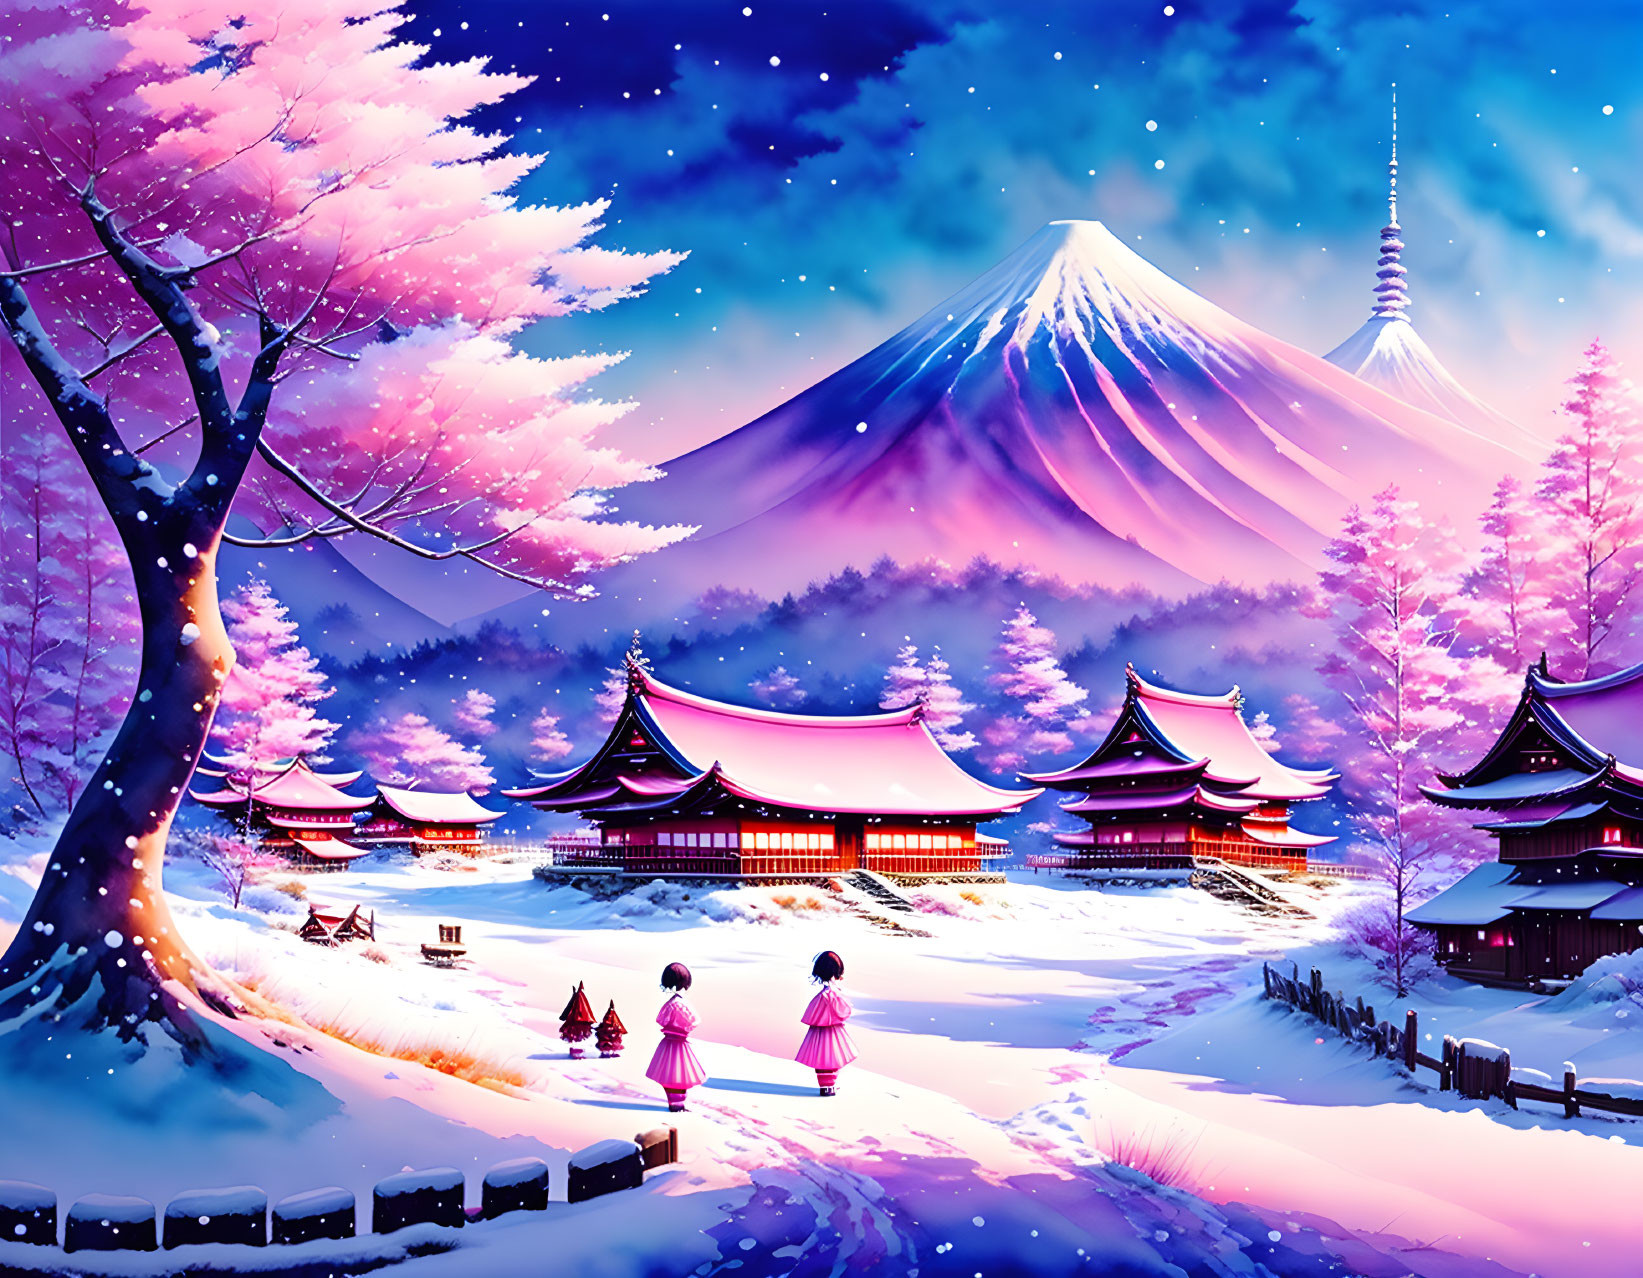 Snow-covered Japanese village with pink sakura trees and Mount Fuji in twilight